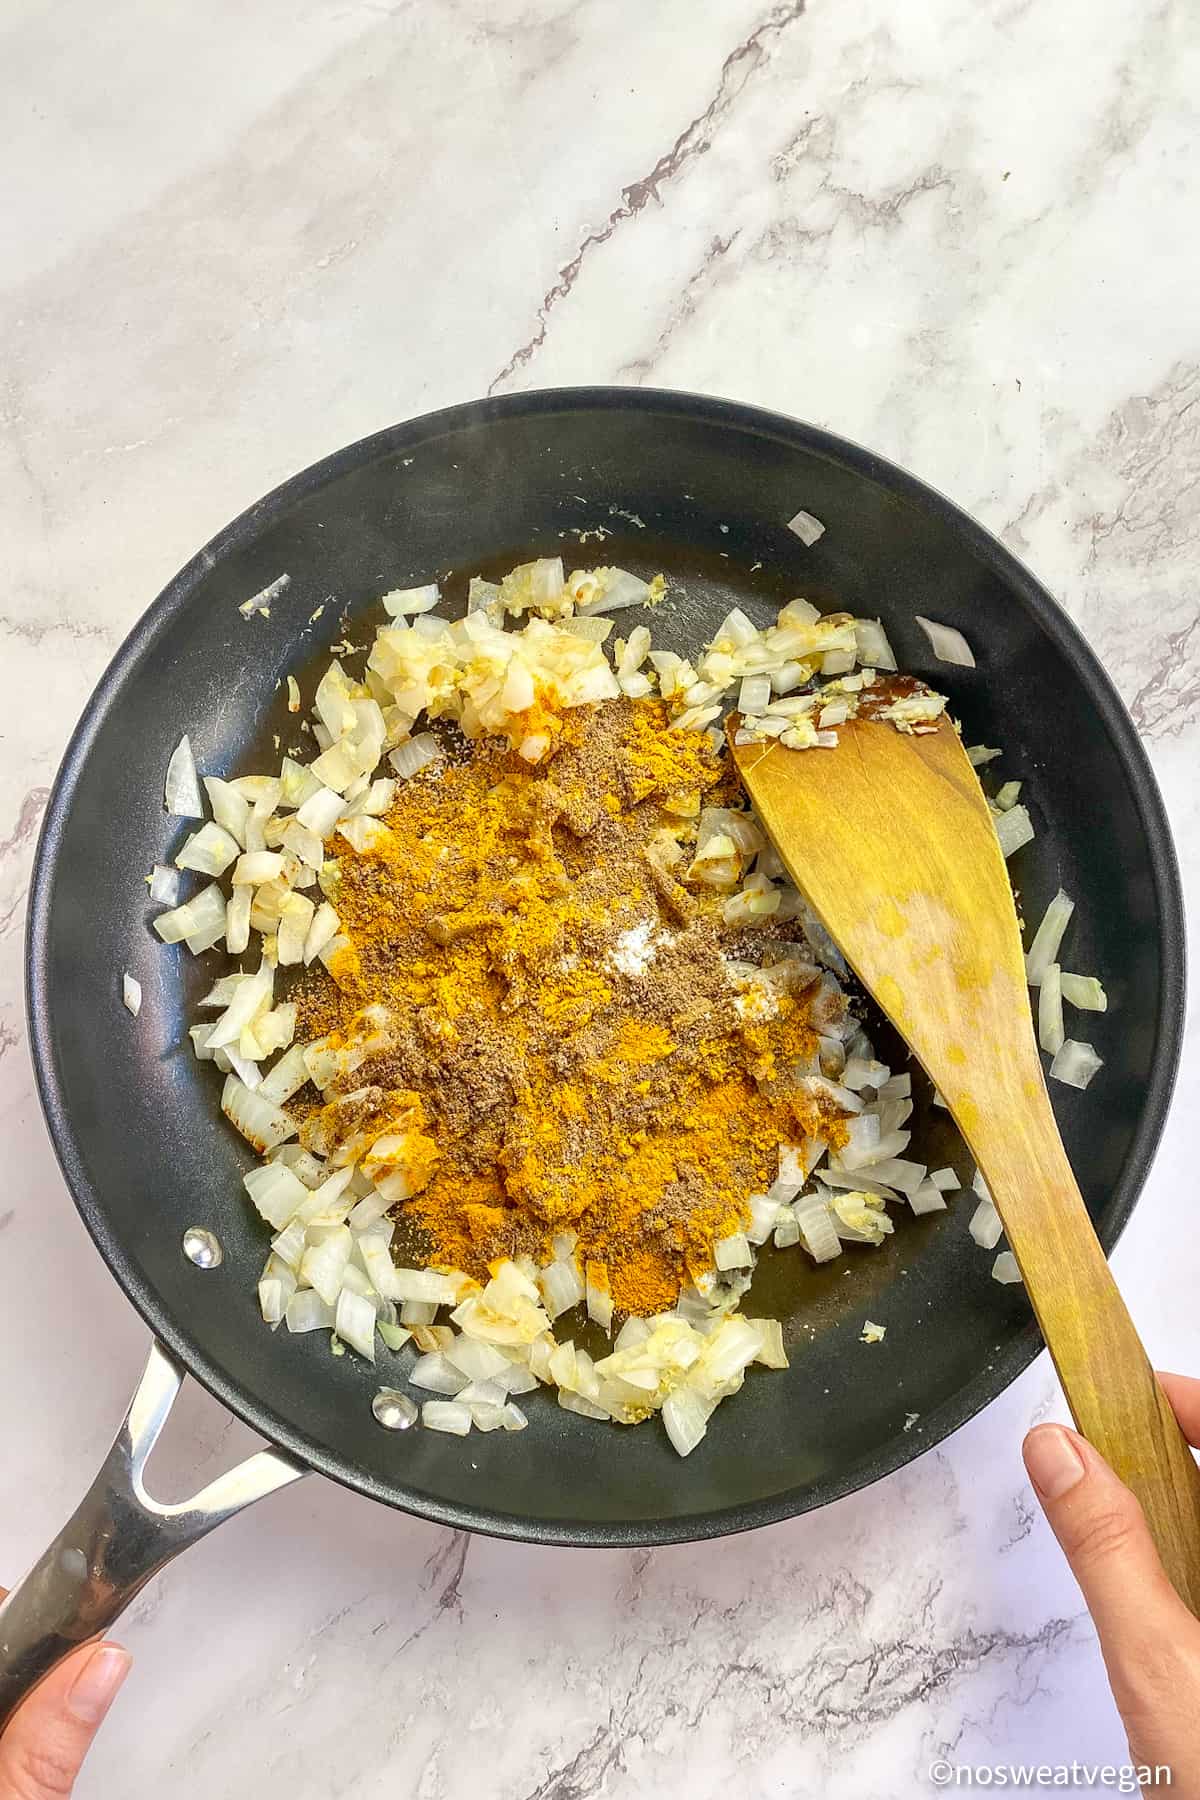 Spices and onions in a skillet.